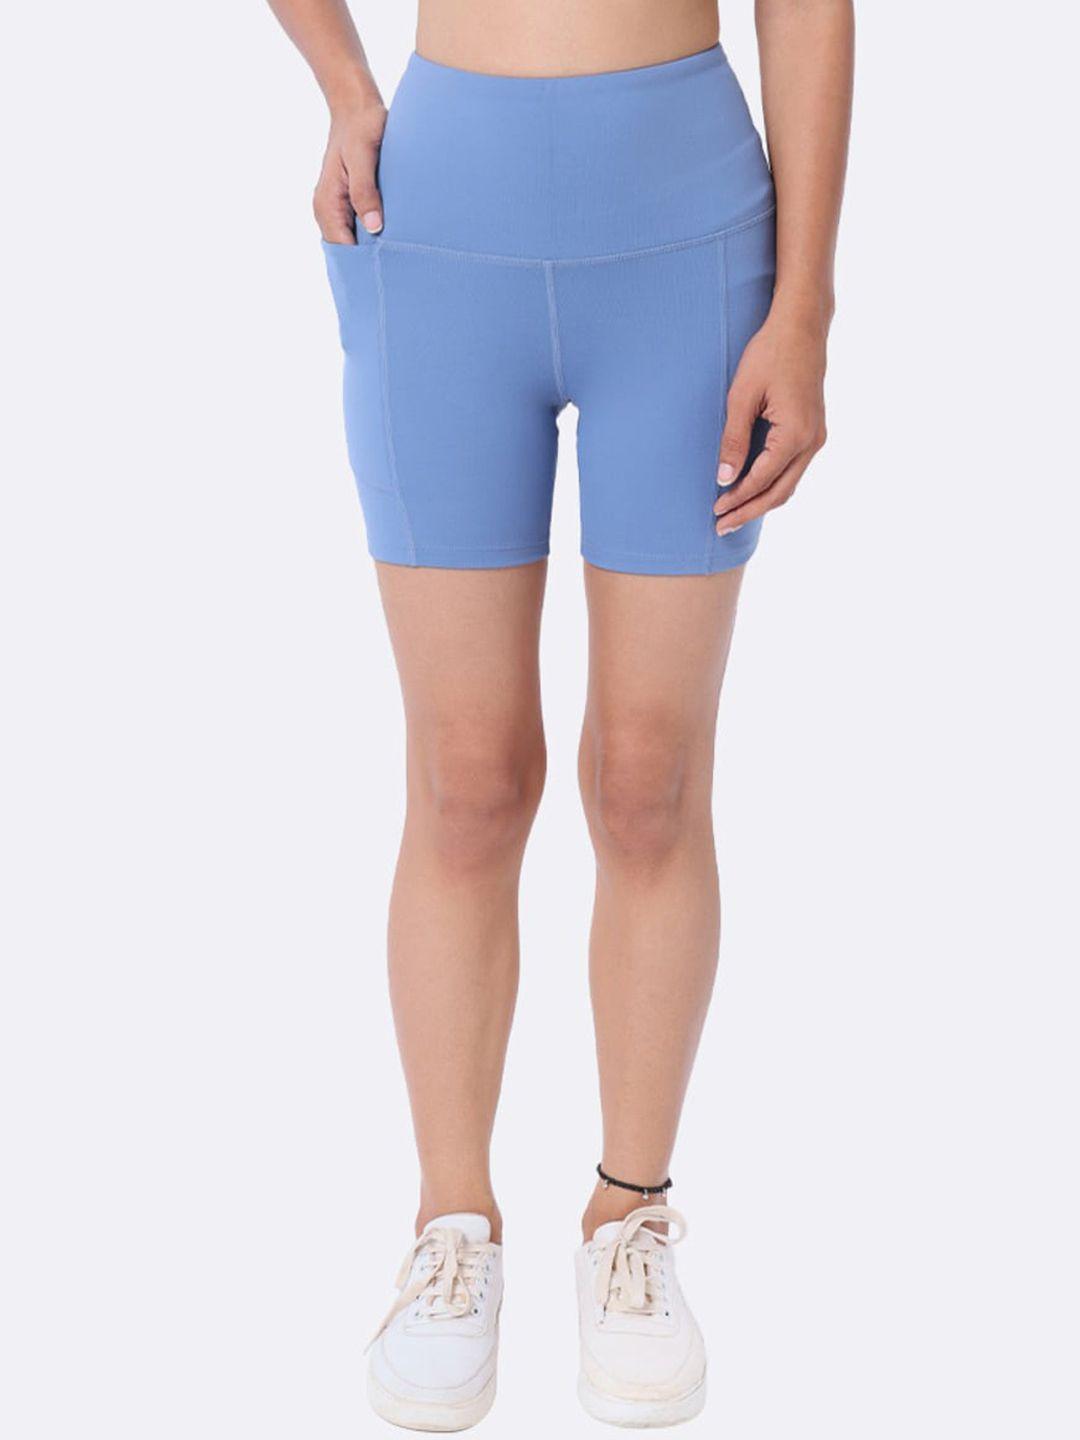 blissclub-women-bloom-blue-high-waist-the-ultimate-shorts-with-2-pockets